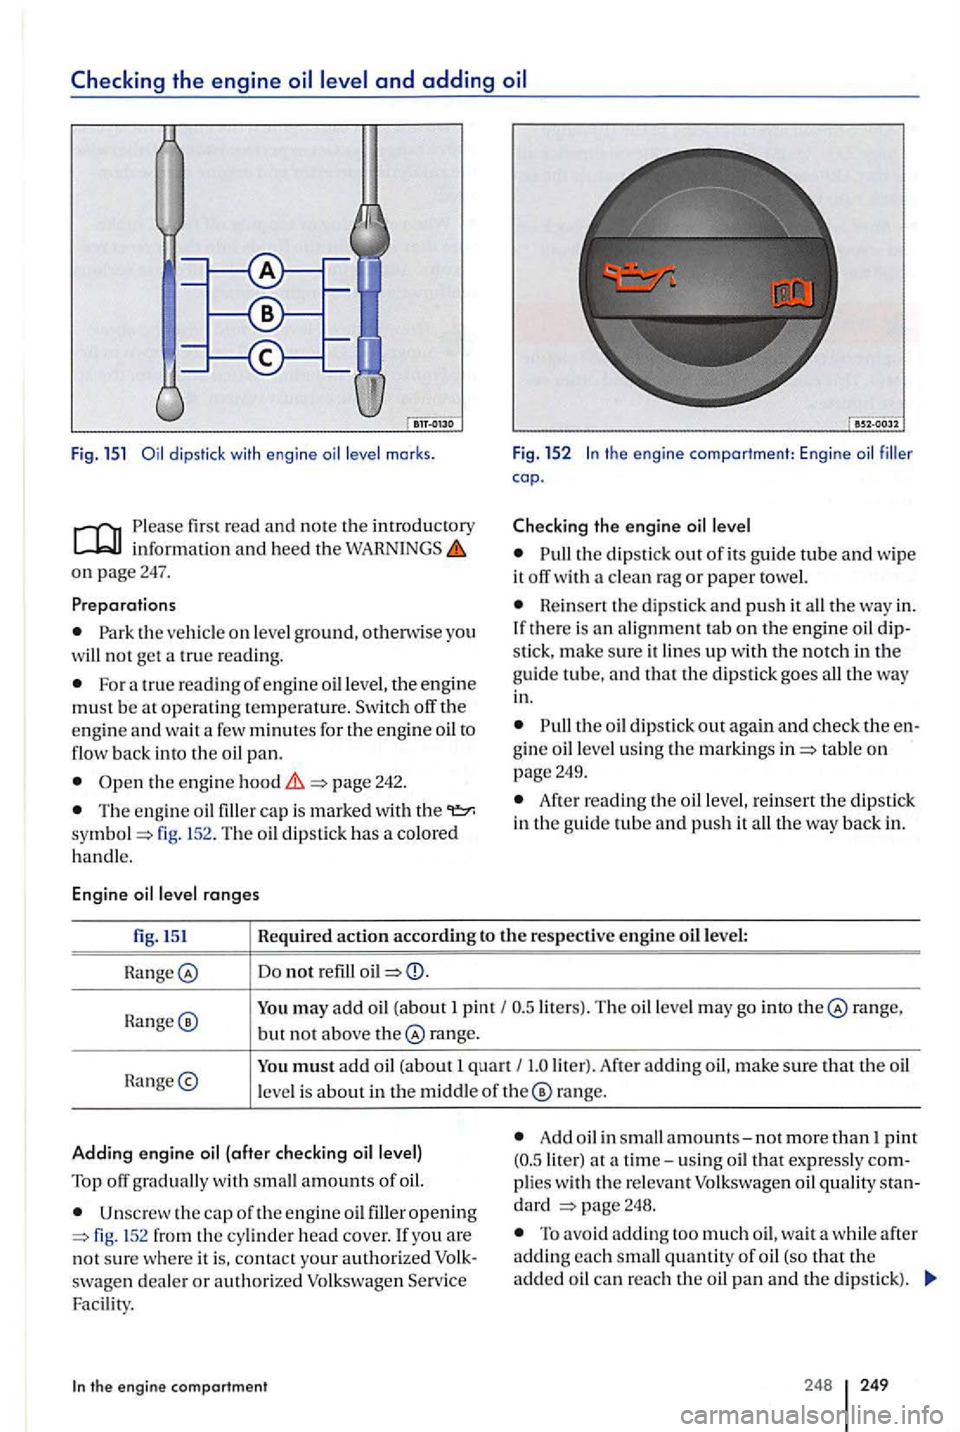 VOLKSWAGEN GOLF PLUS 2004  Owners Manual Checking the engine 
u 
J 
Fig. 15 1 
information and heed the o n  pag e 247. 
For  a tru e reading of e ng ine oil level, the engine must be at operating temperature.  Switch off the engin e and wa 